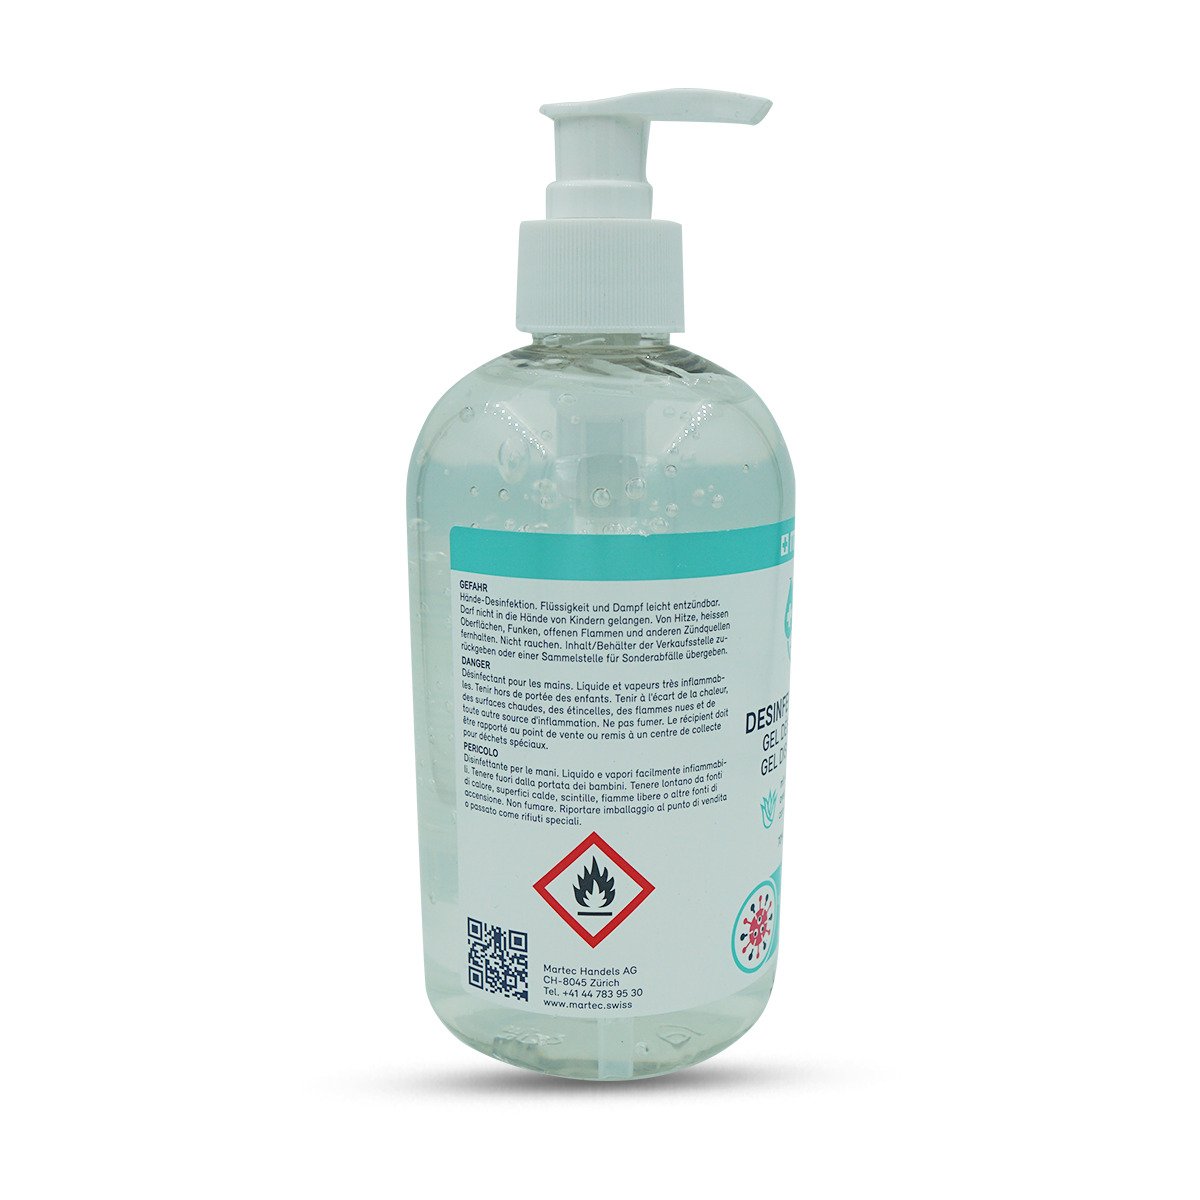 Hand disinfectant gel with pump